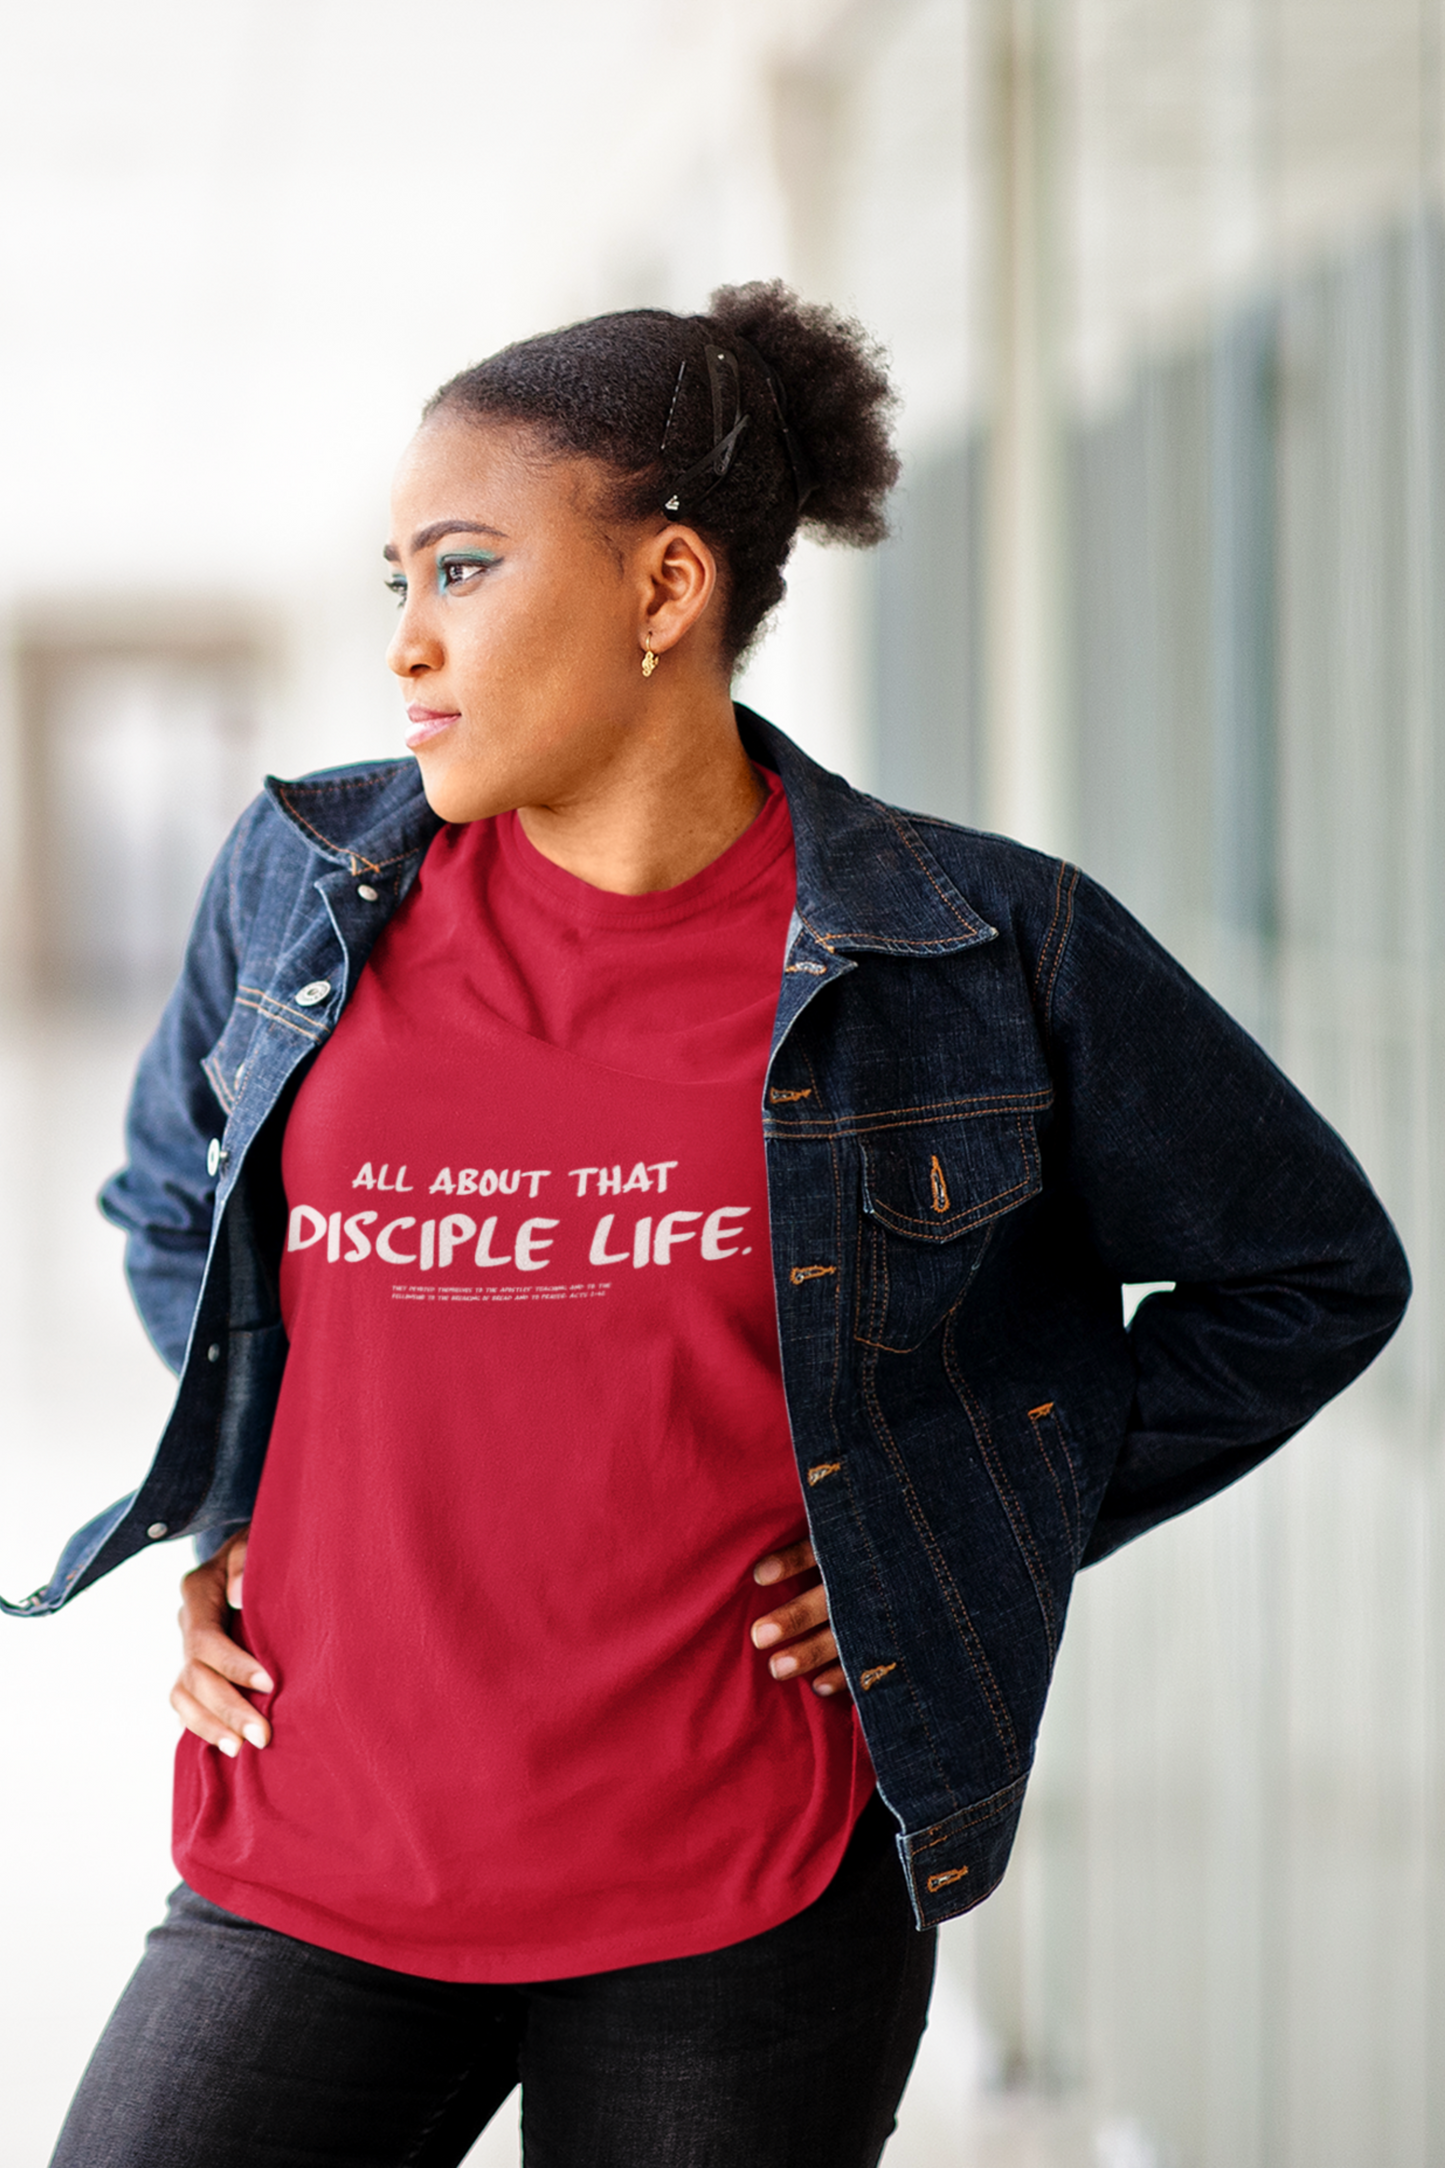 All about that Disciple Life. Tee.